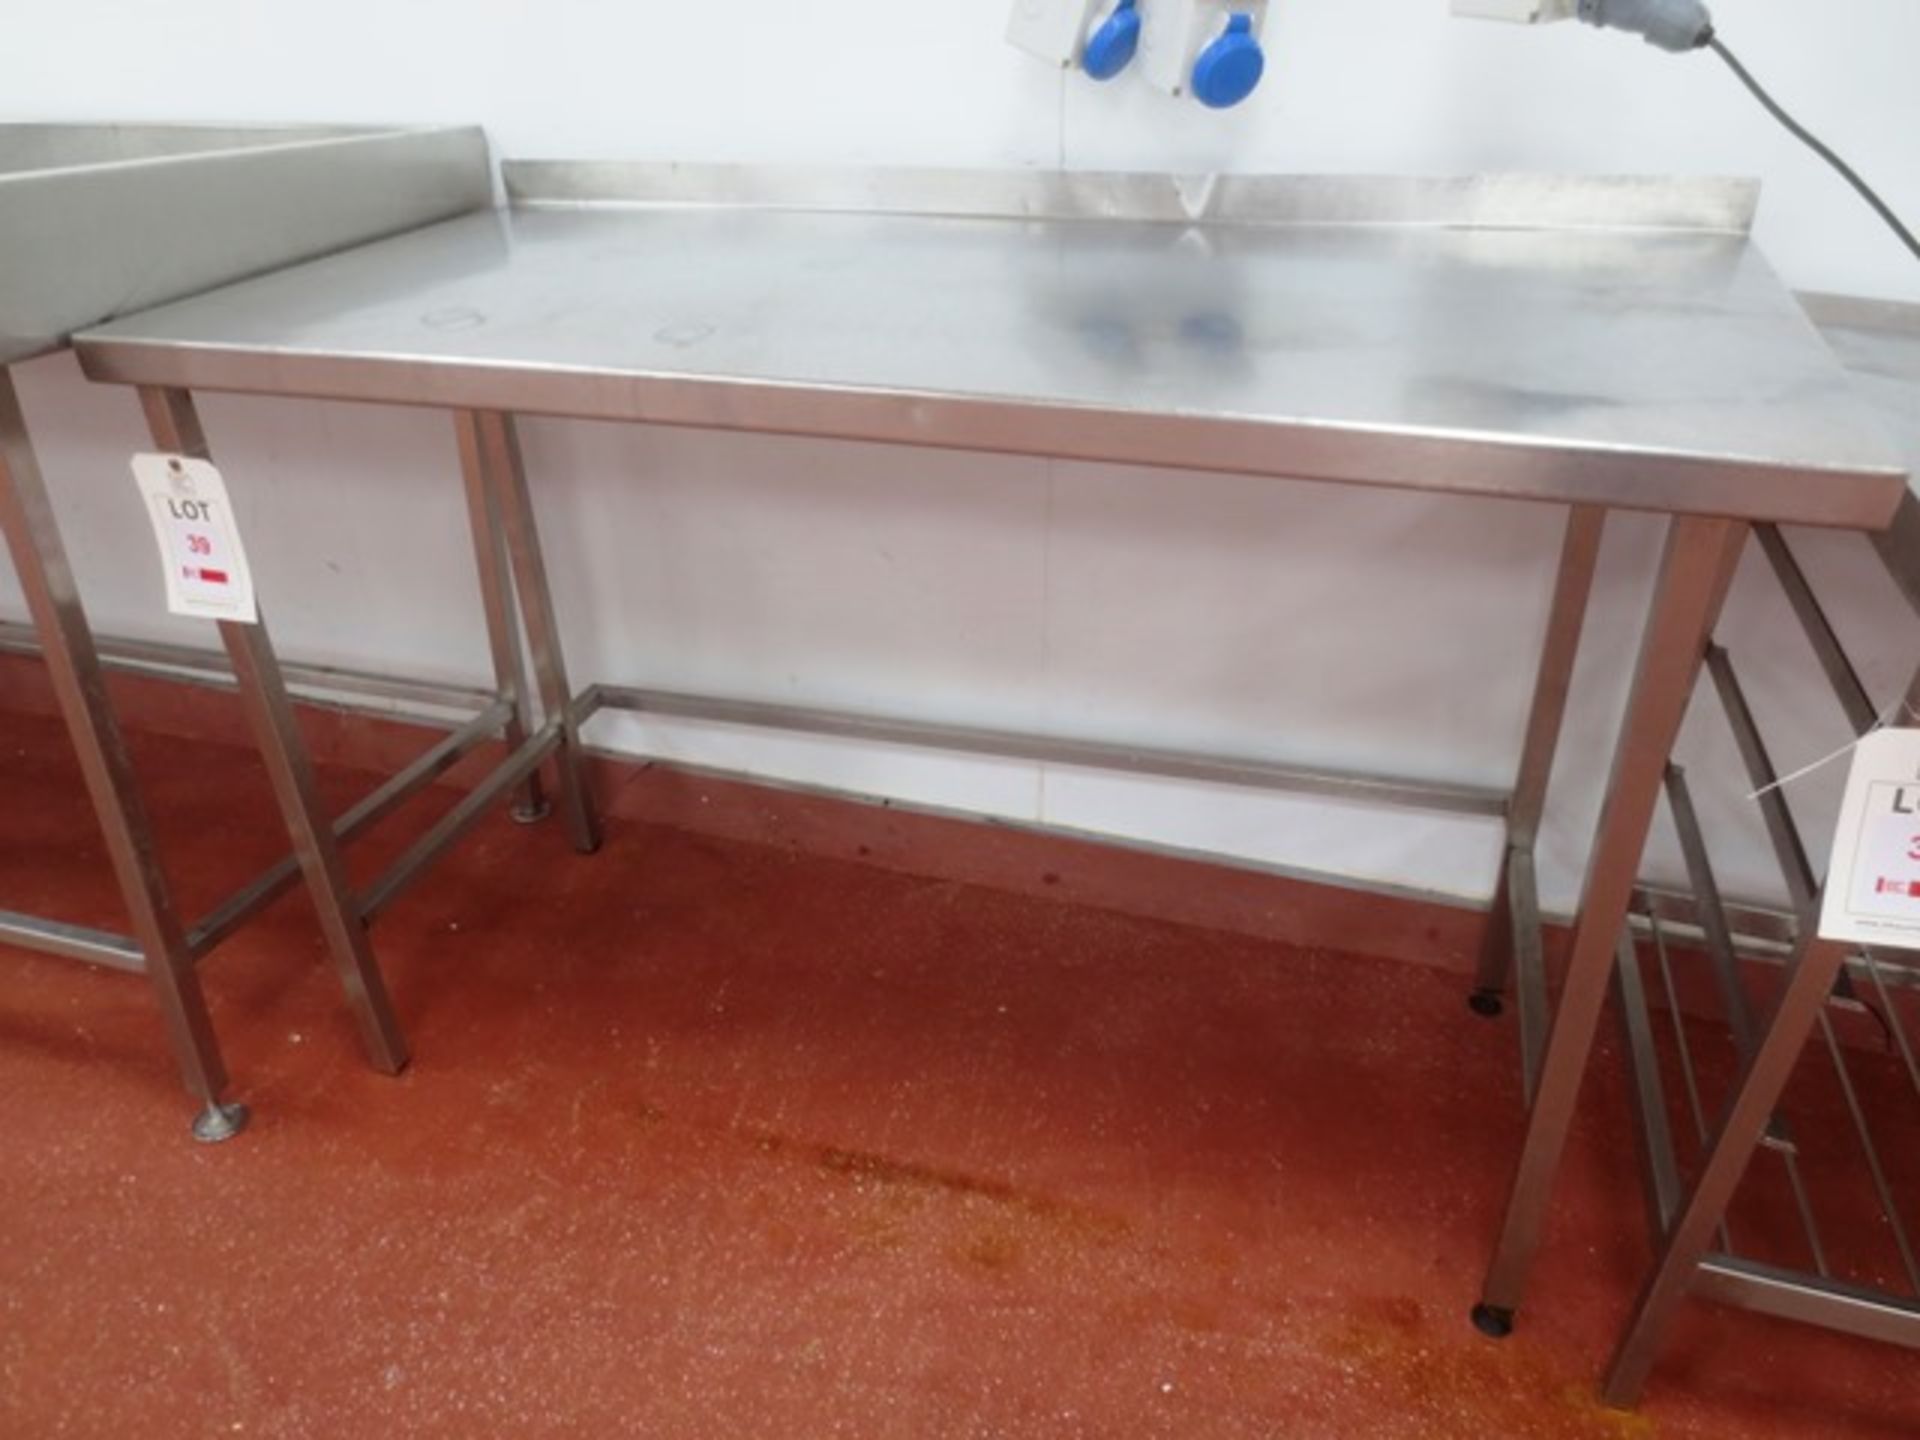 Stainless steel rectangular table, approx 1400 x 600mm